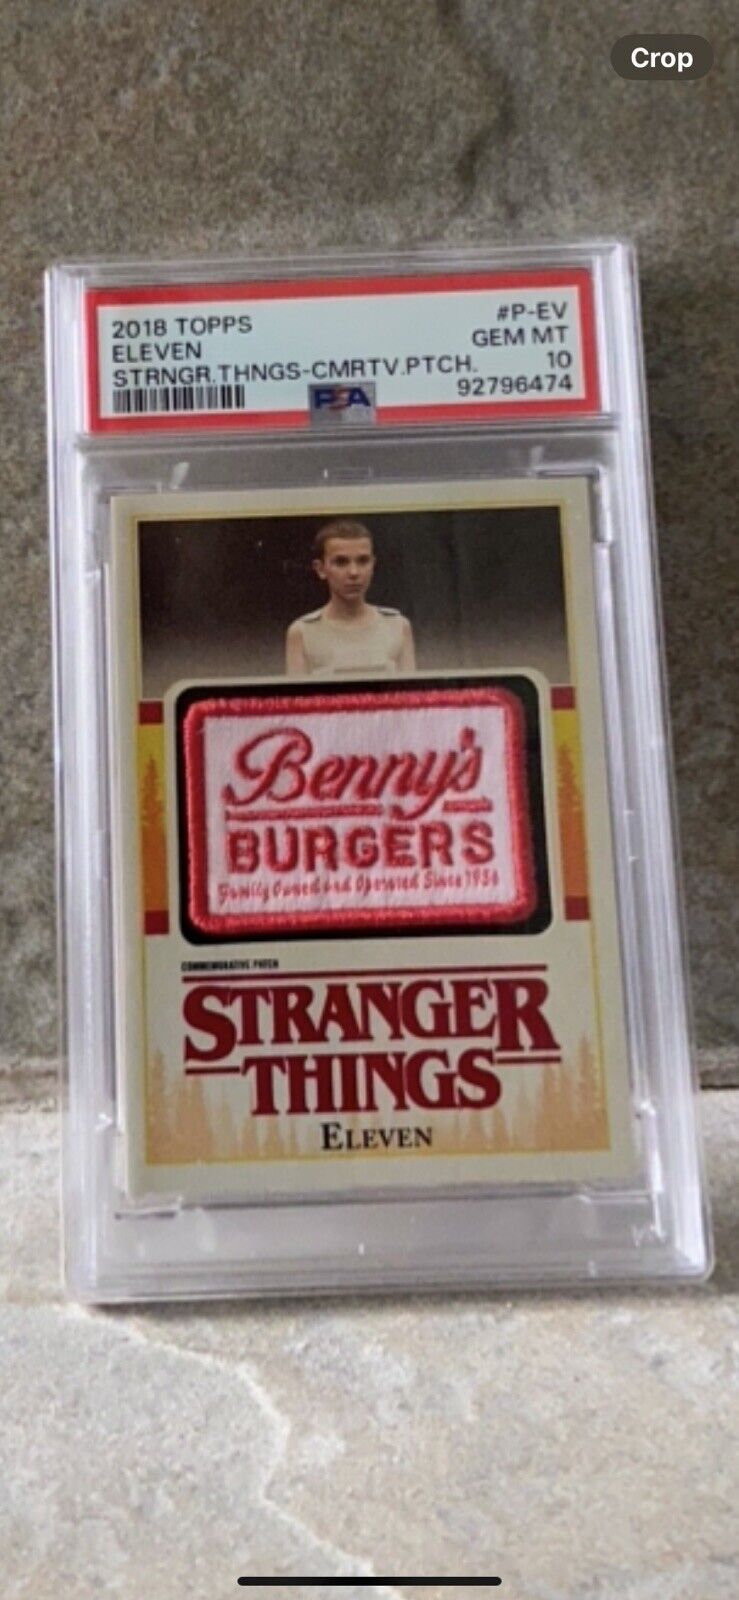 2018 Topps Stranger Things CMRTV Patch Eleven Benny’s Burgers 🍔 PSA 10  😮 